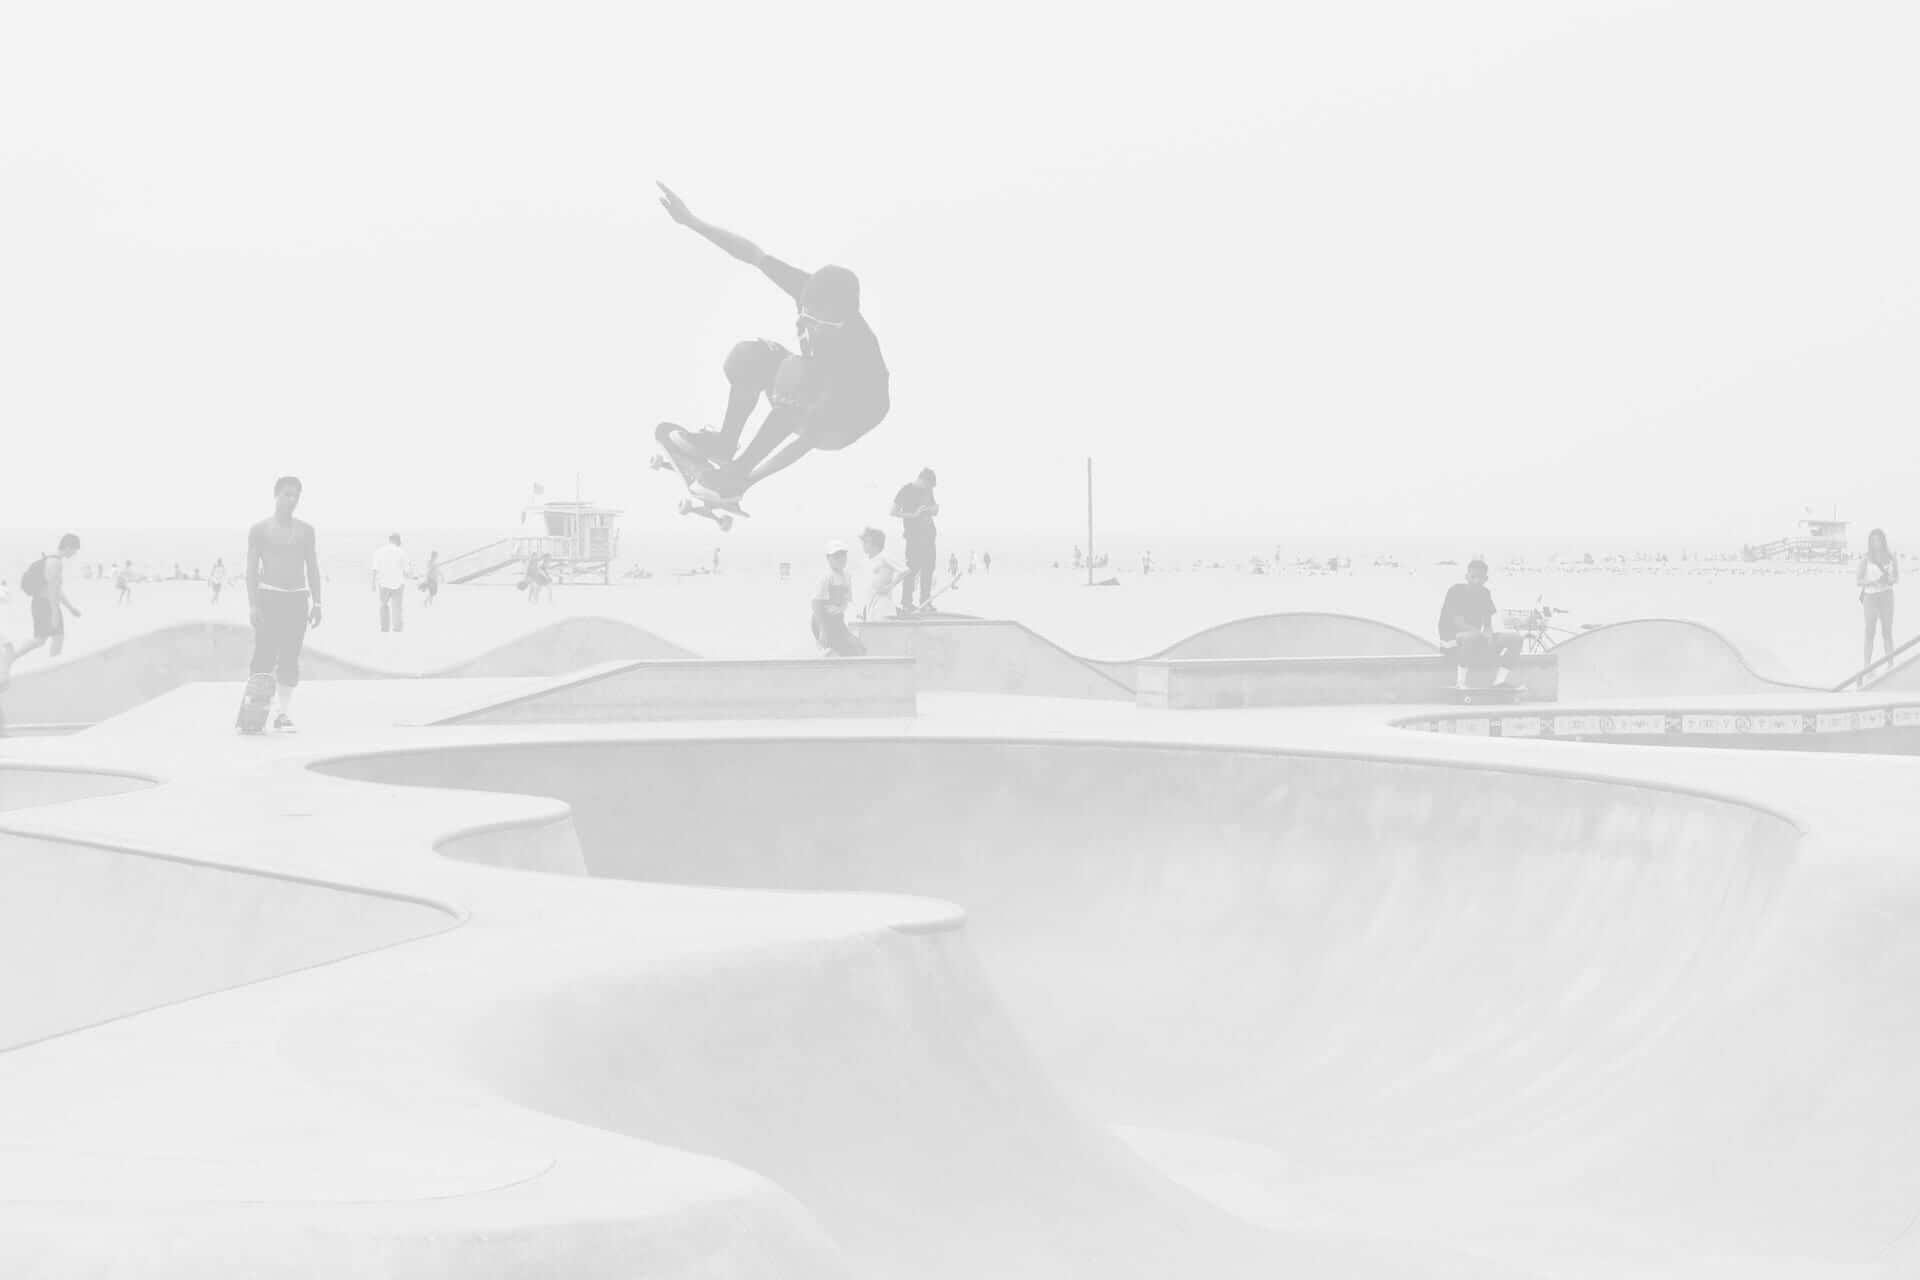 A skateboarder performs a jump in a skatepark with other skaters in the background, all in a hazy, overexposed setting.